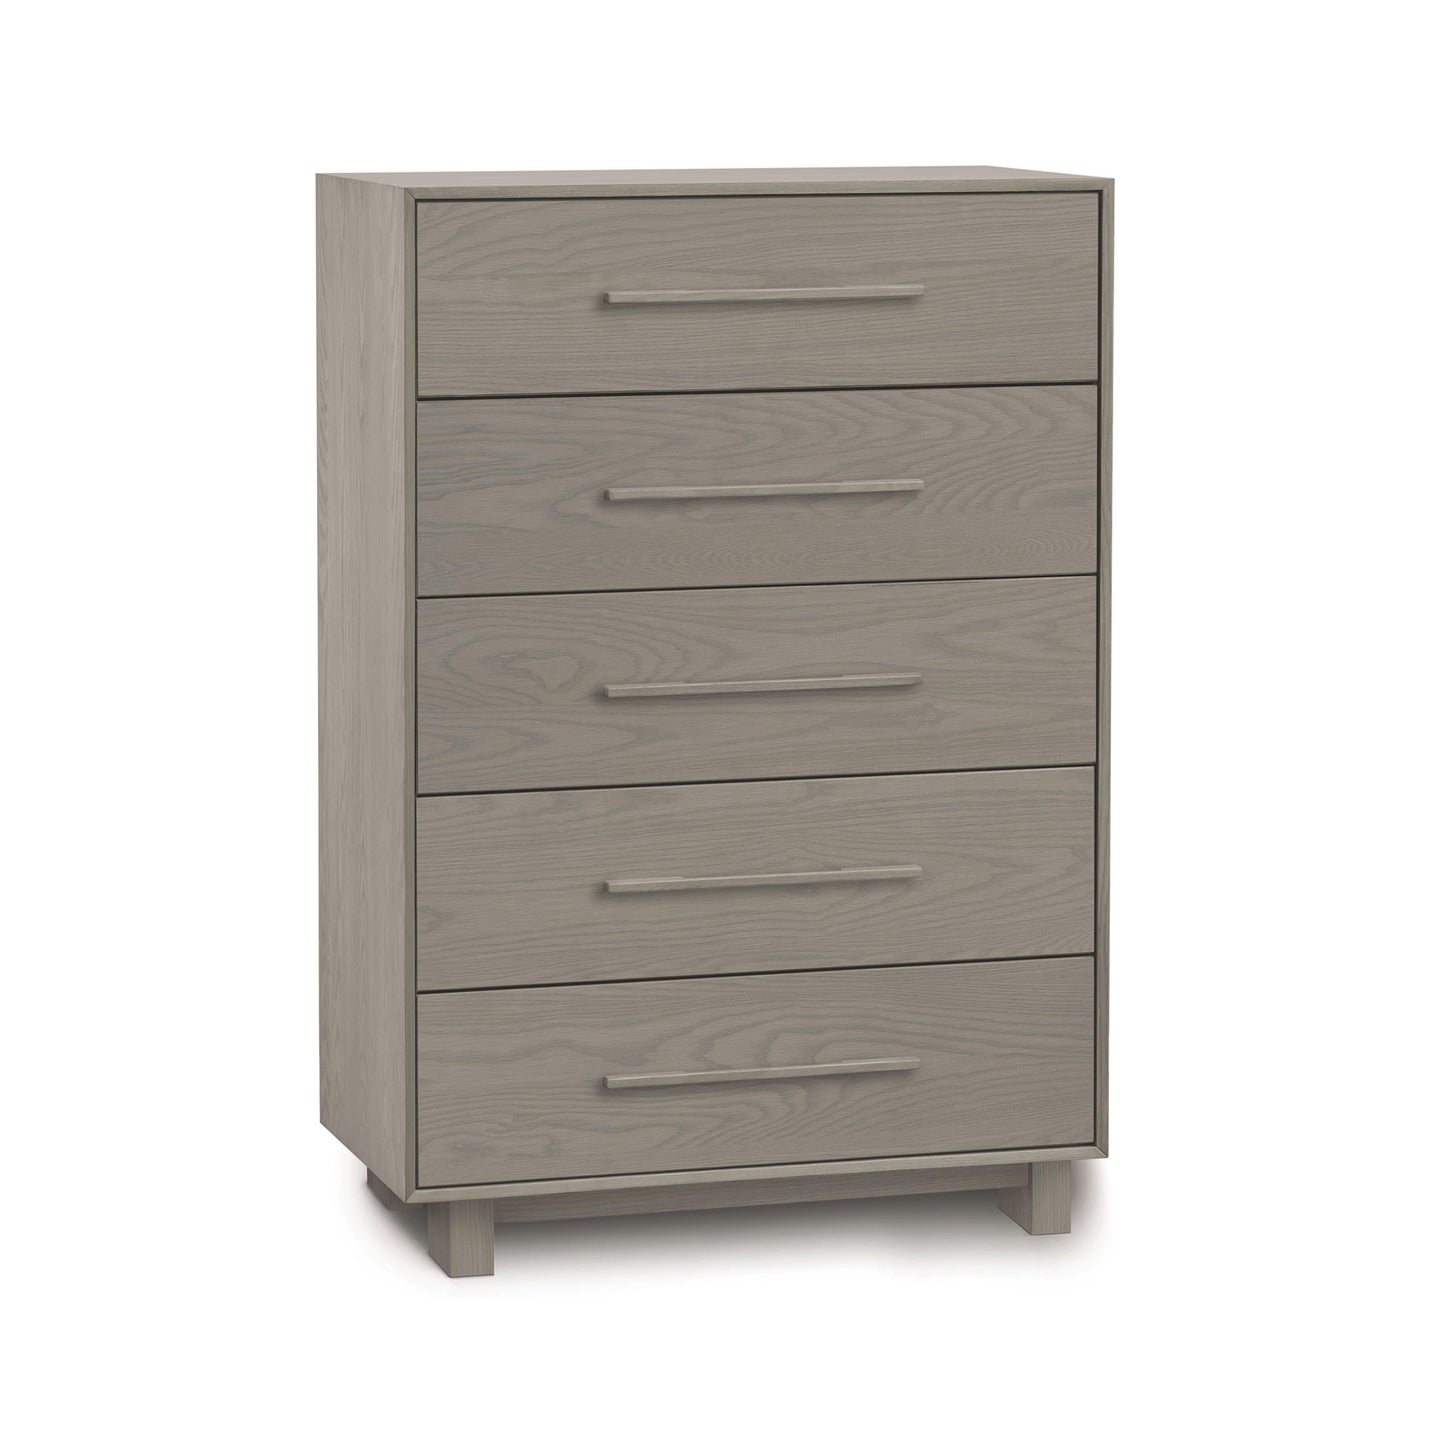 A Copeland Furniture Sloane 5-Drawer Wide Chest providing storage space on a white background.